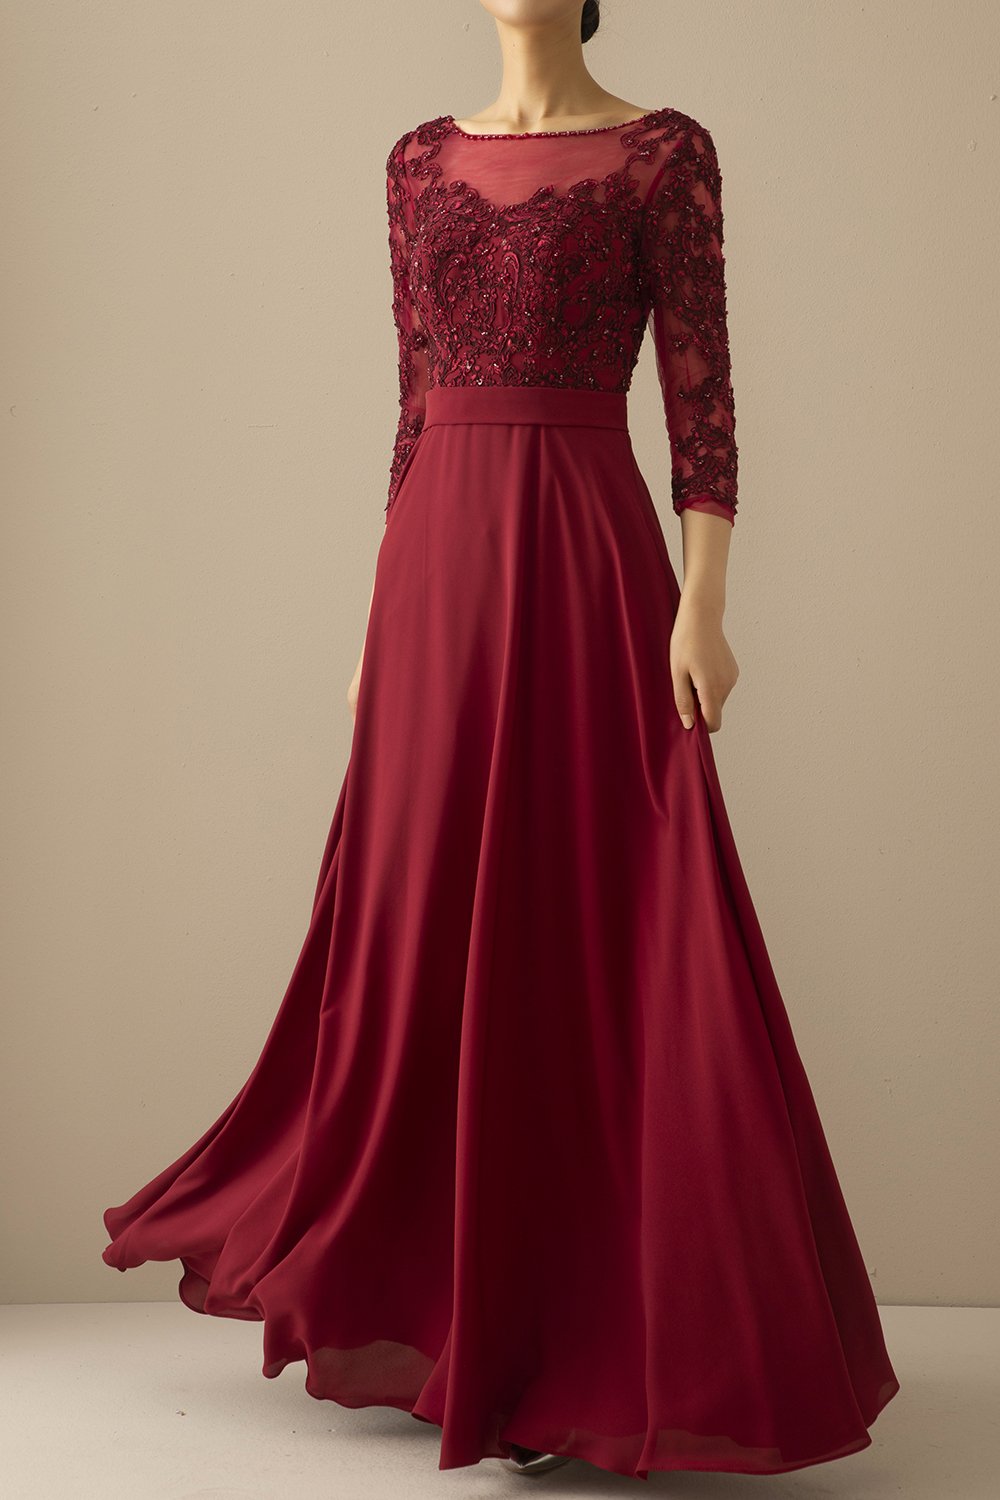 Burgundy Mother of the Bride Dress With Sleeves